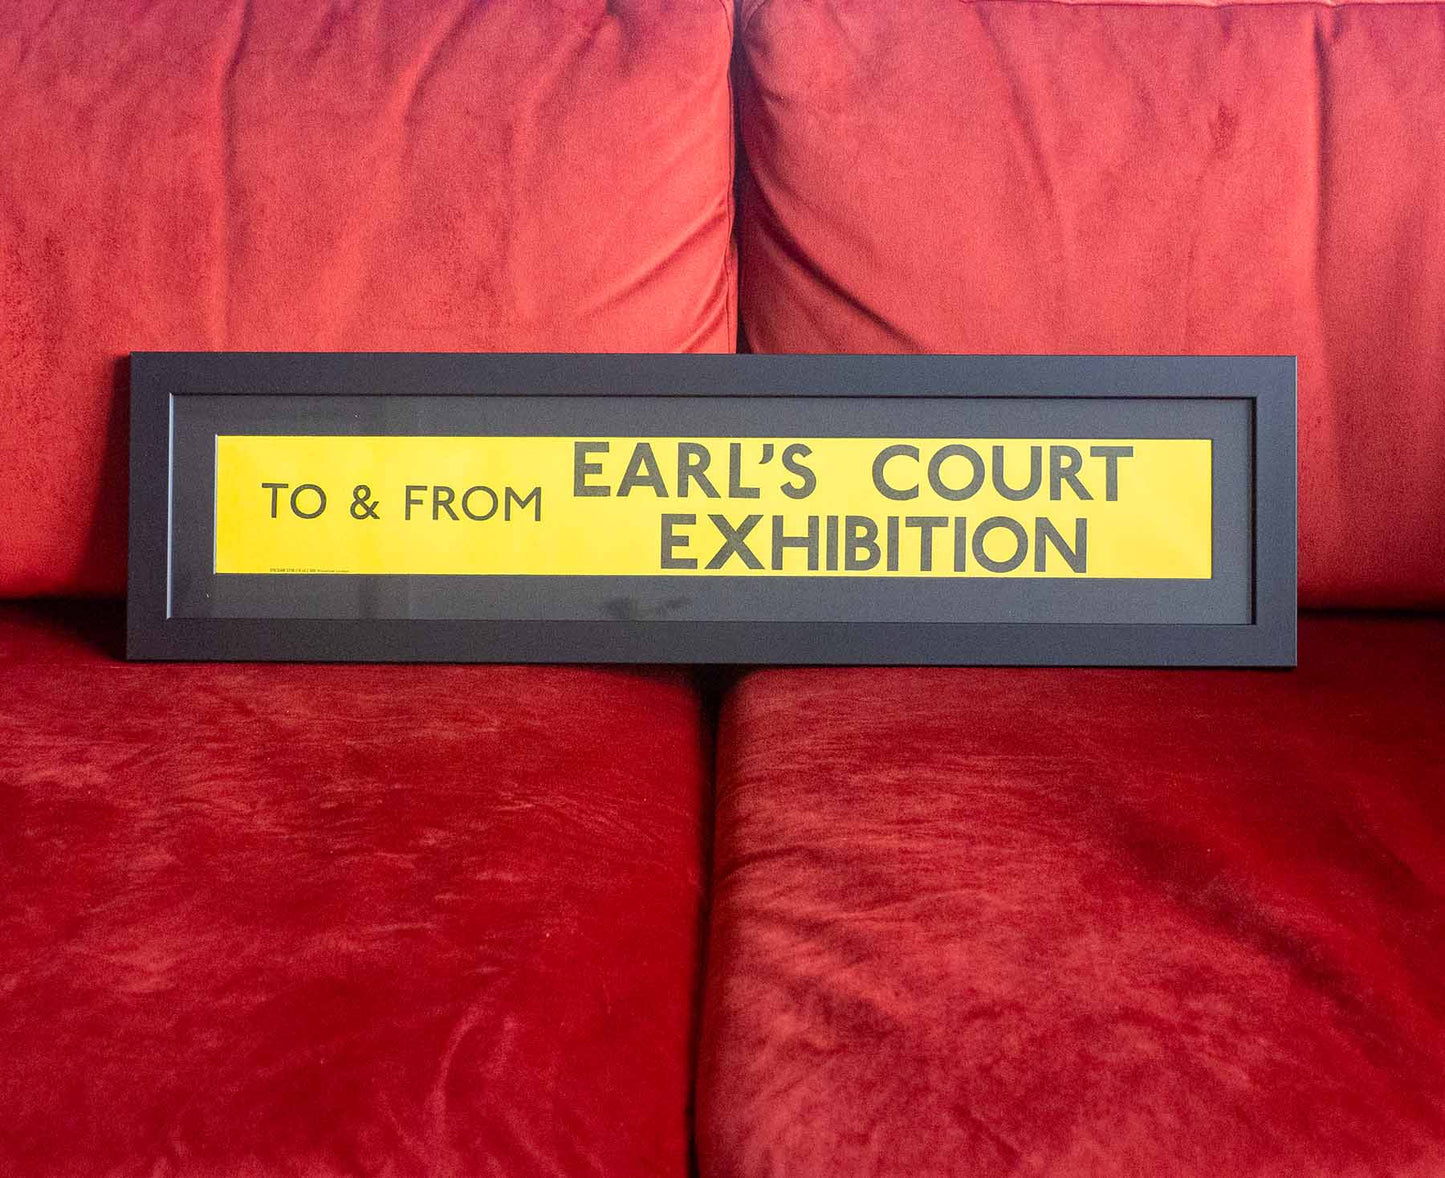 Earl's Court Exhibition Framed Yellow Mini London Bus Blind